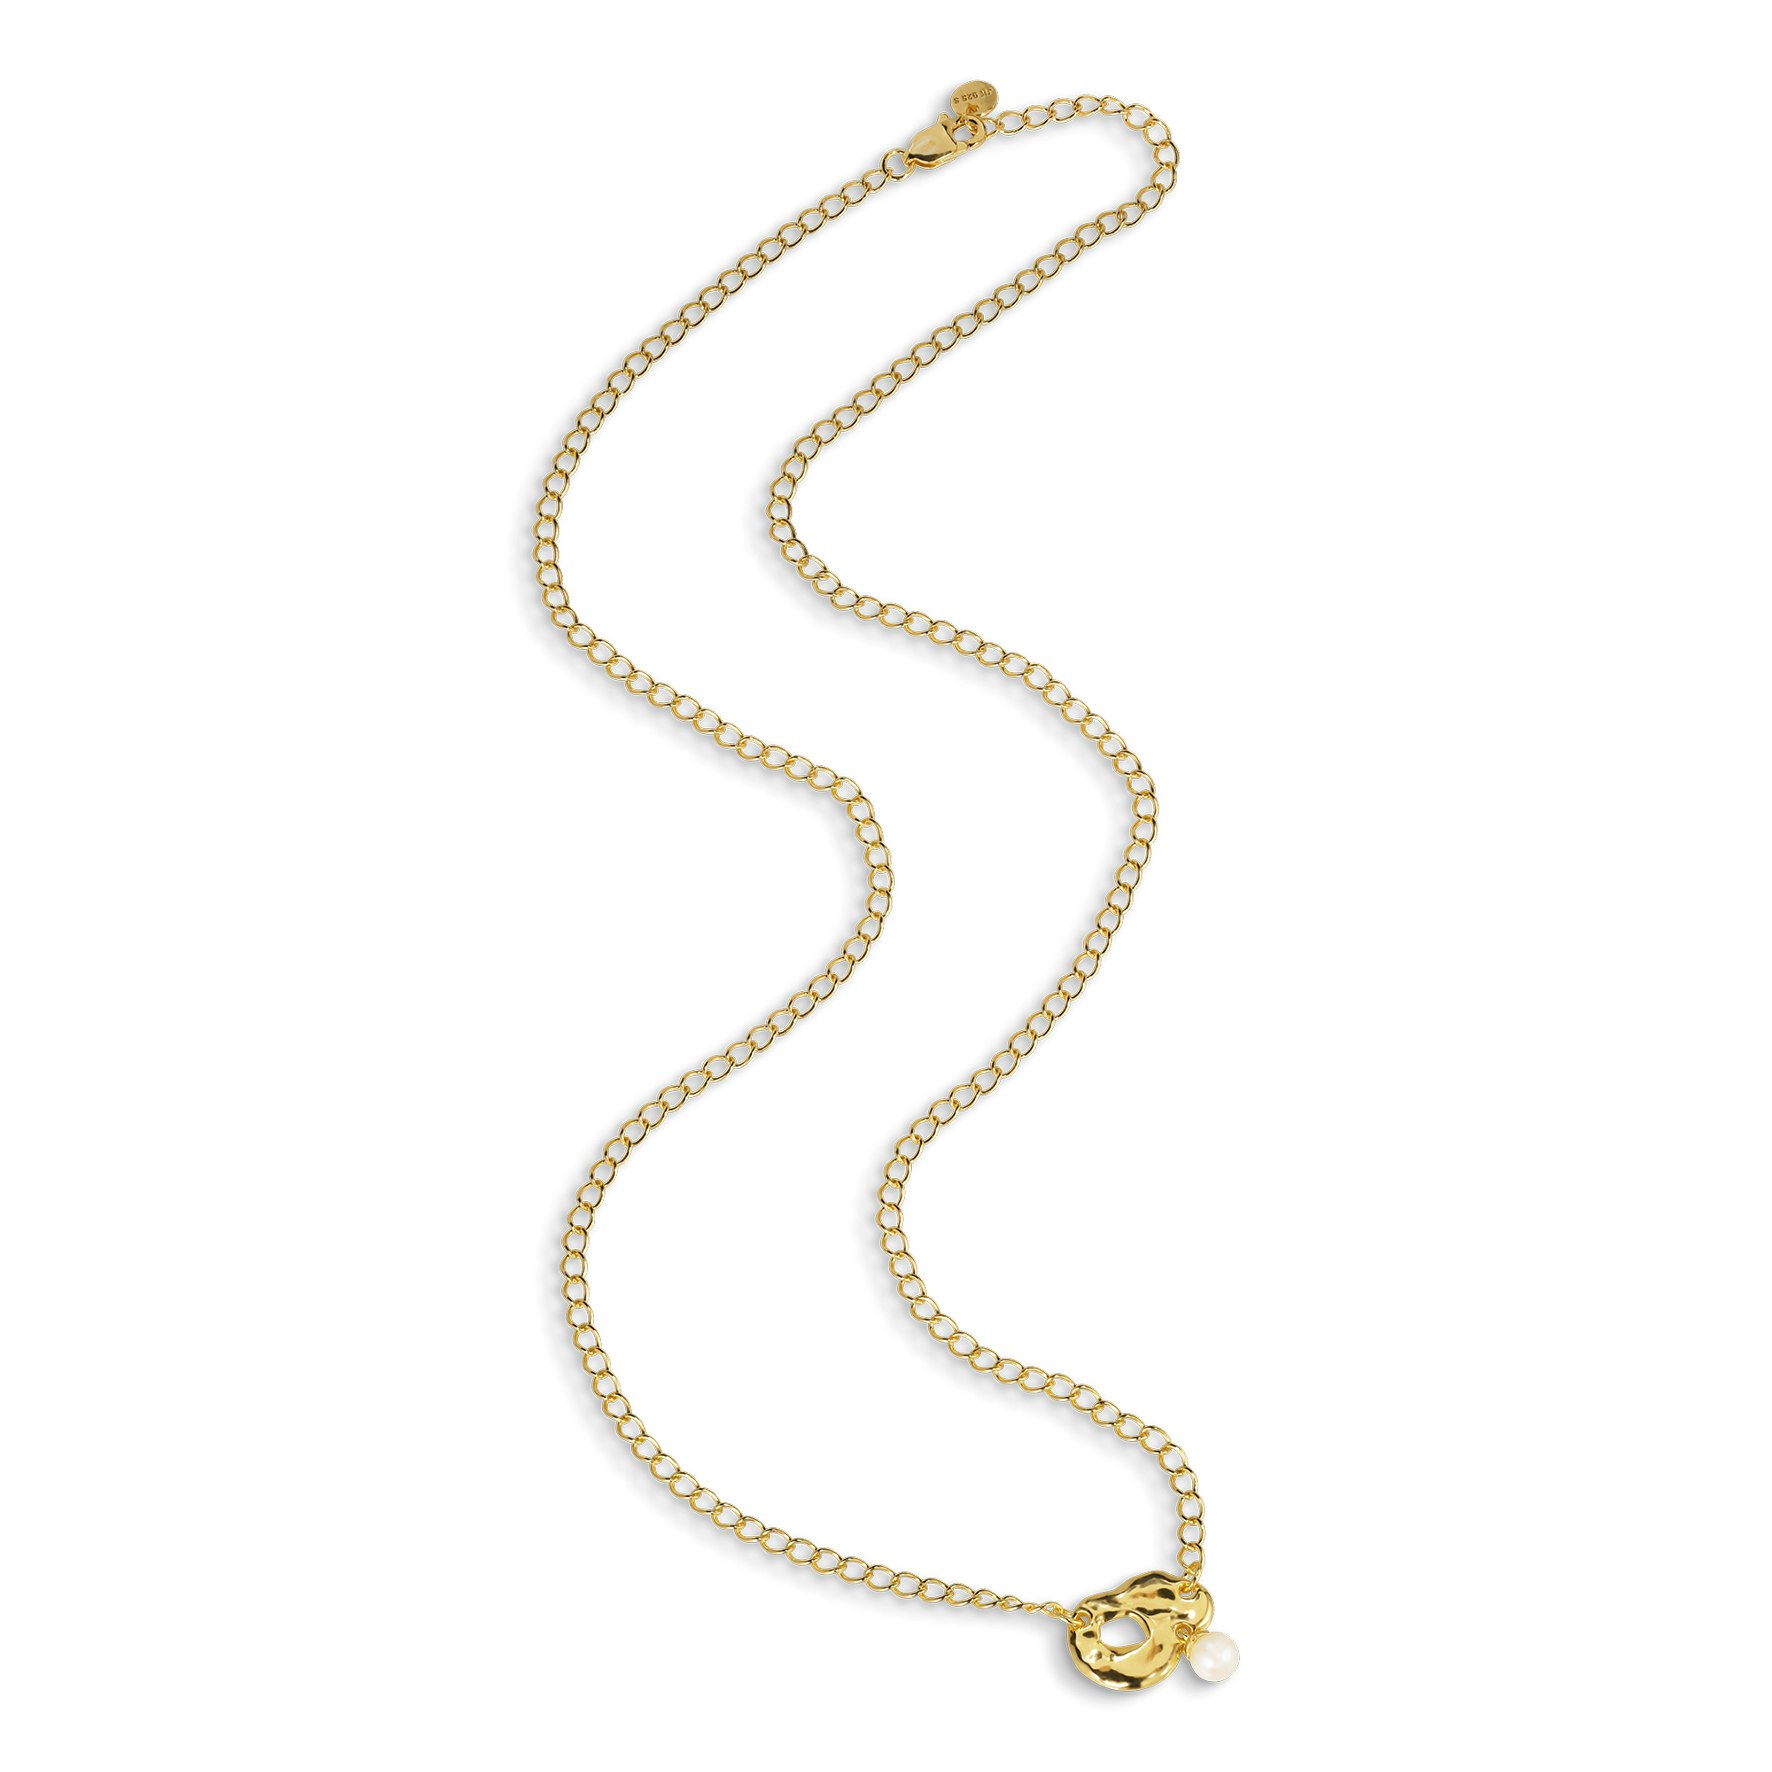 Space Necklace from Jane Kønig in Goldplated Silver Sterling 925